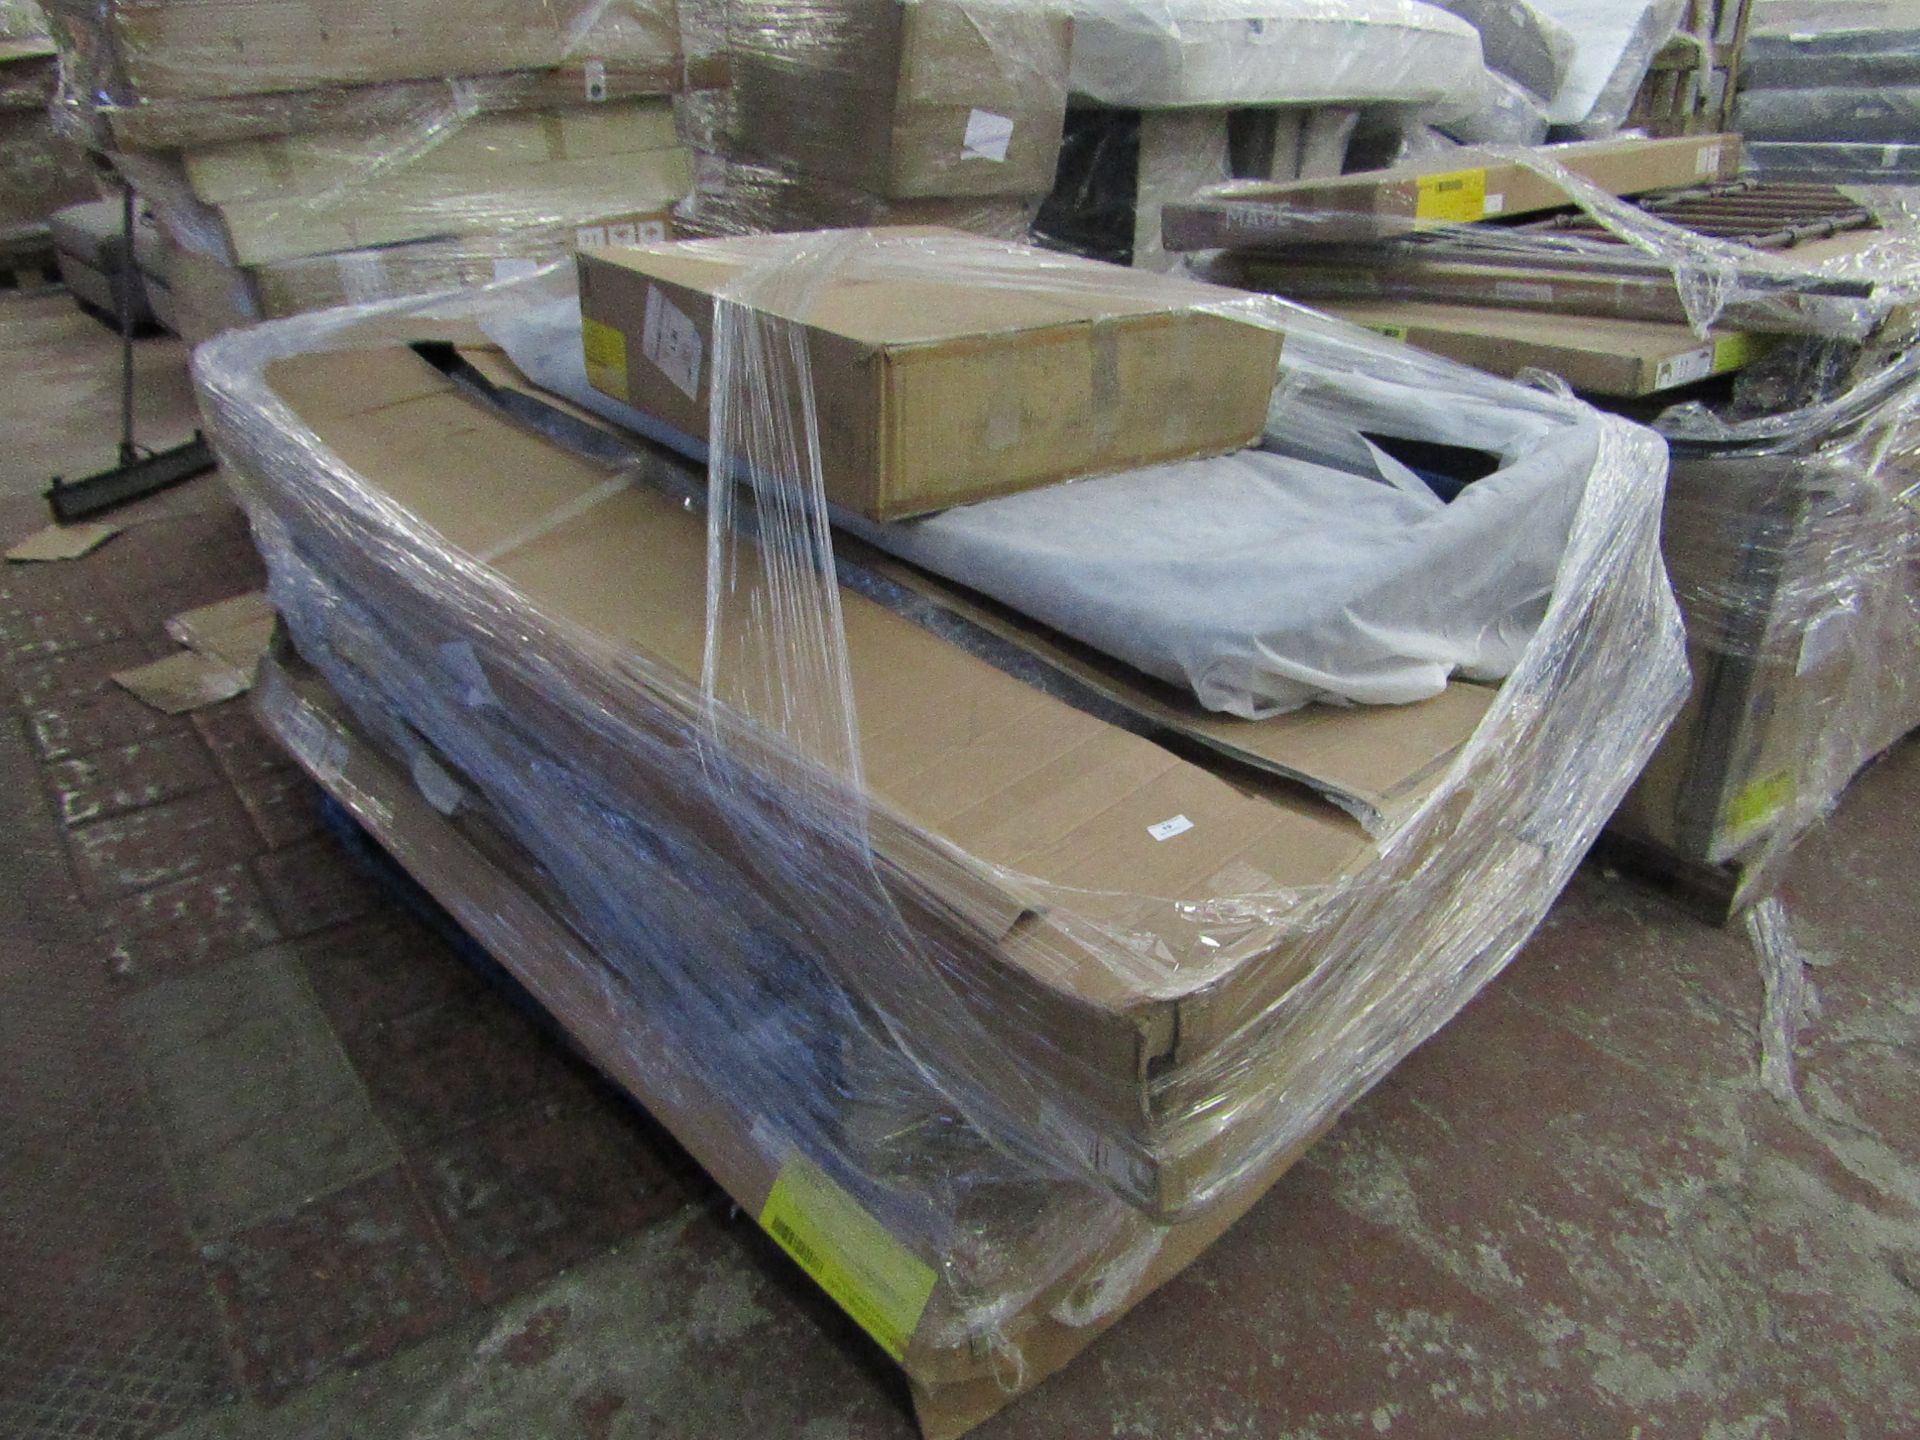 | 1X | PALLET OF MADE.COM RAW RETURNS MOST OF WHICH LOOKS LIKE BED AND WORDROBE PARTS | CUSTOMER